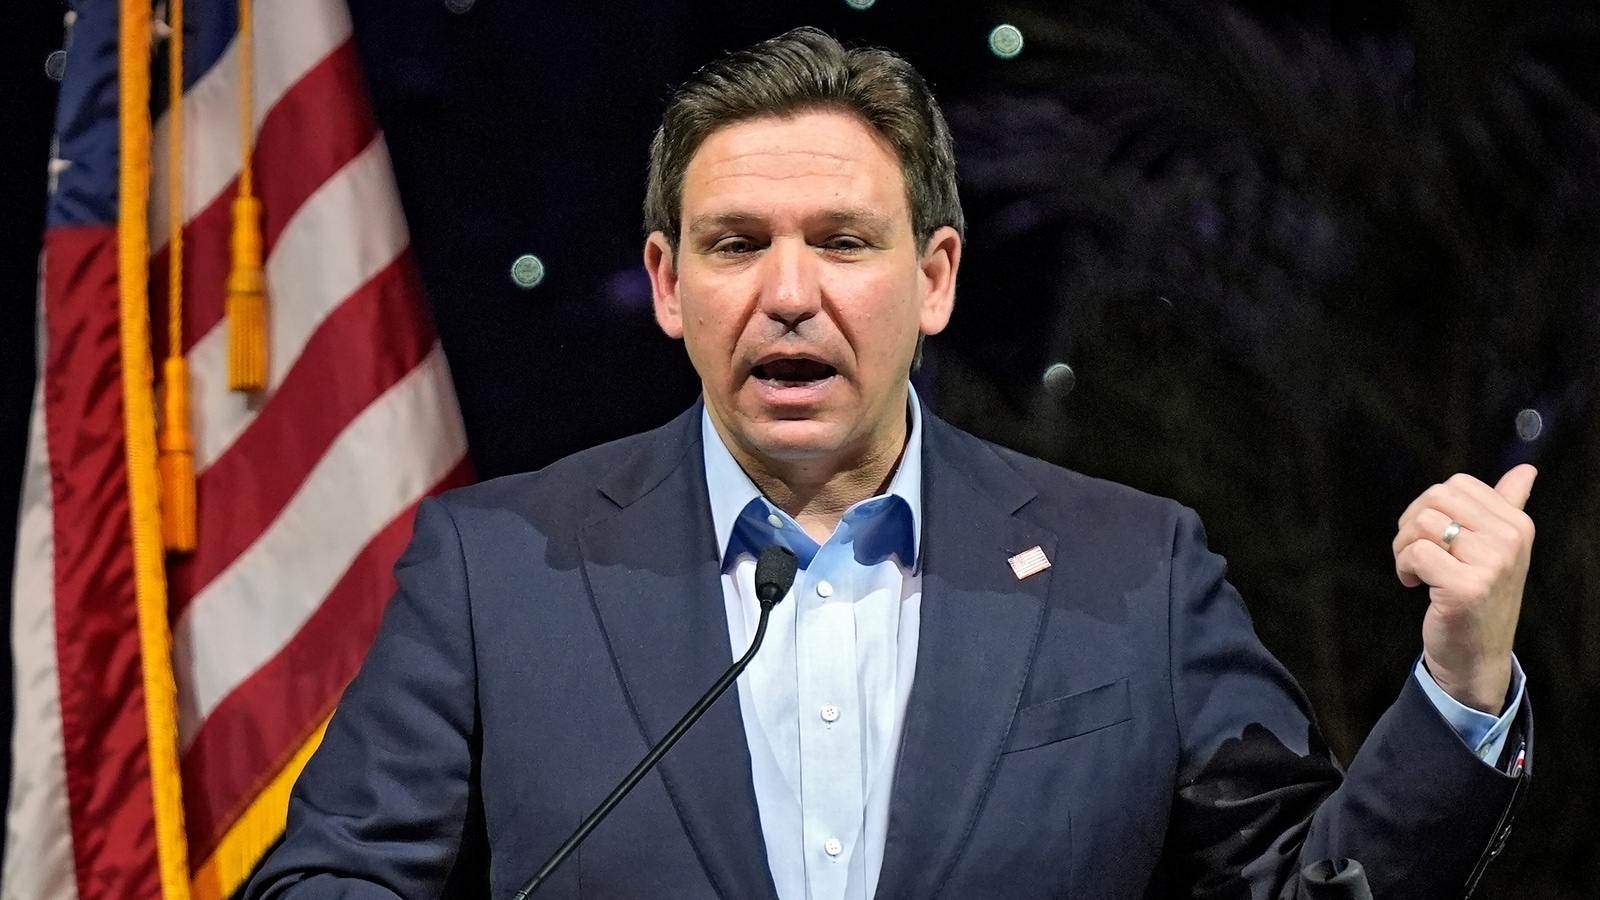 Florida Governor Ron DeSantis says climate change not a reality, deprioritises bill